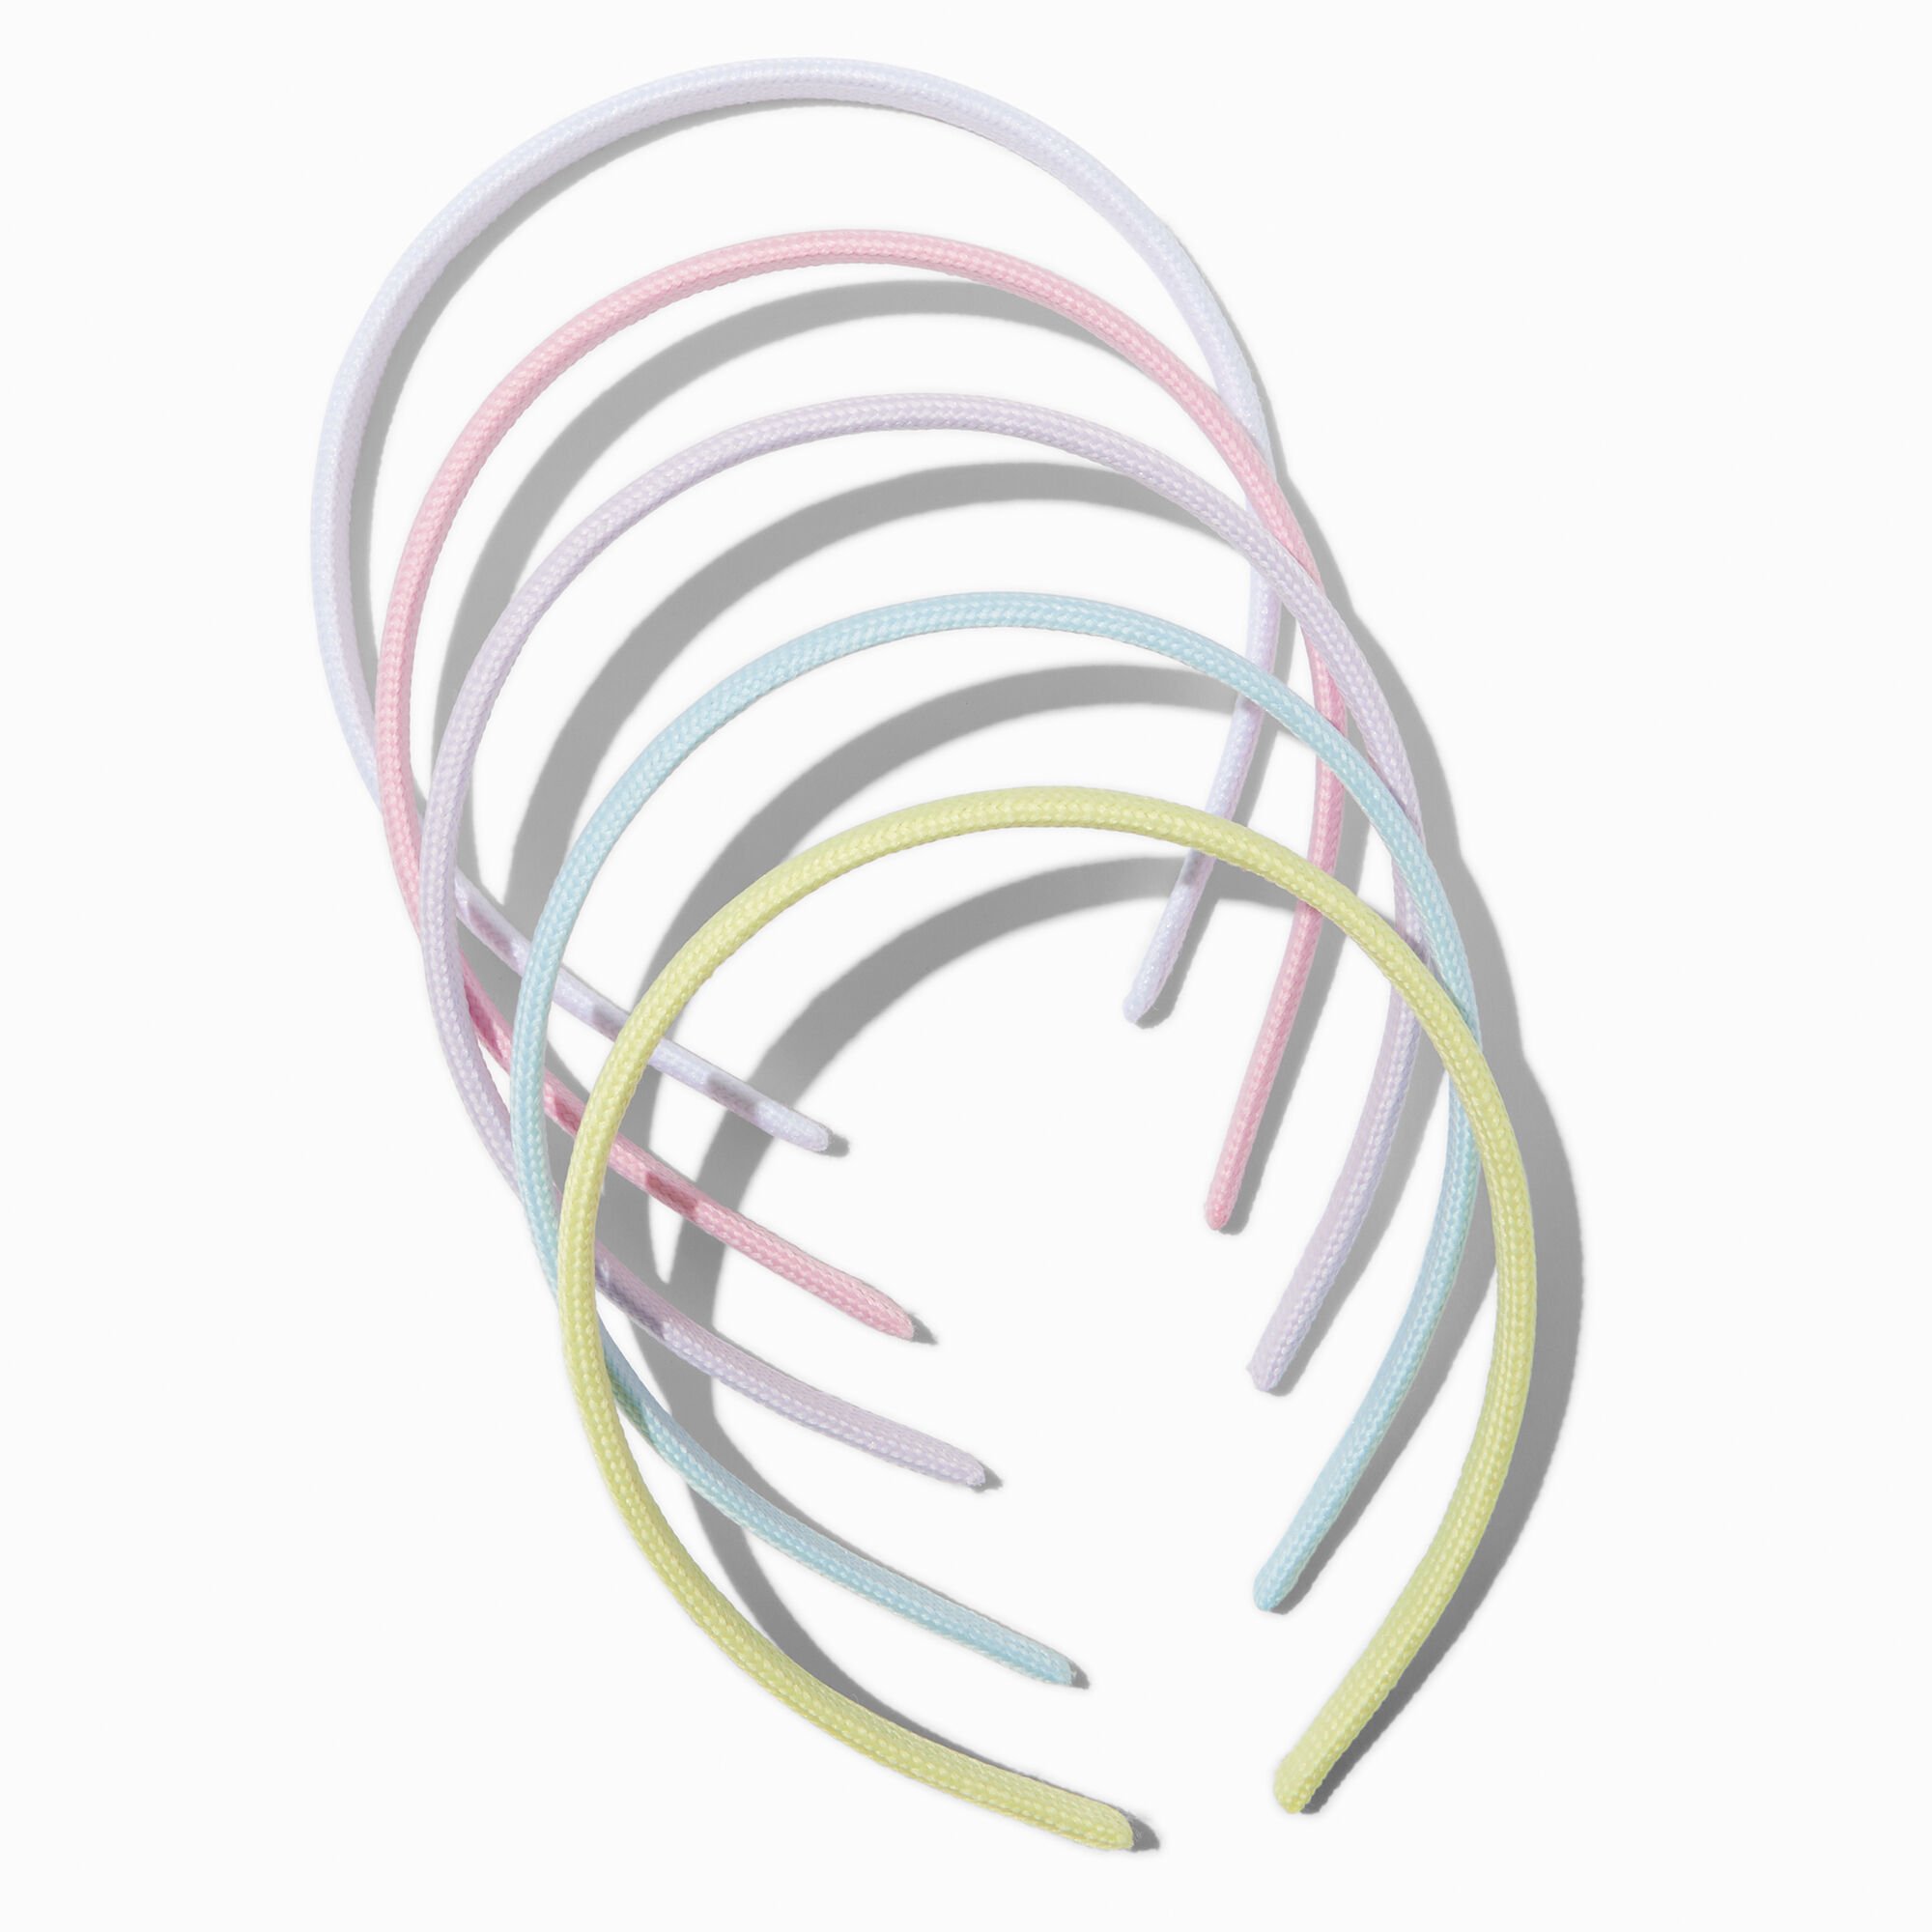 View Claires Club Pastel Rope Plastic Headbands 5 Pack information